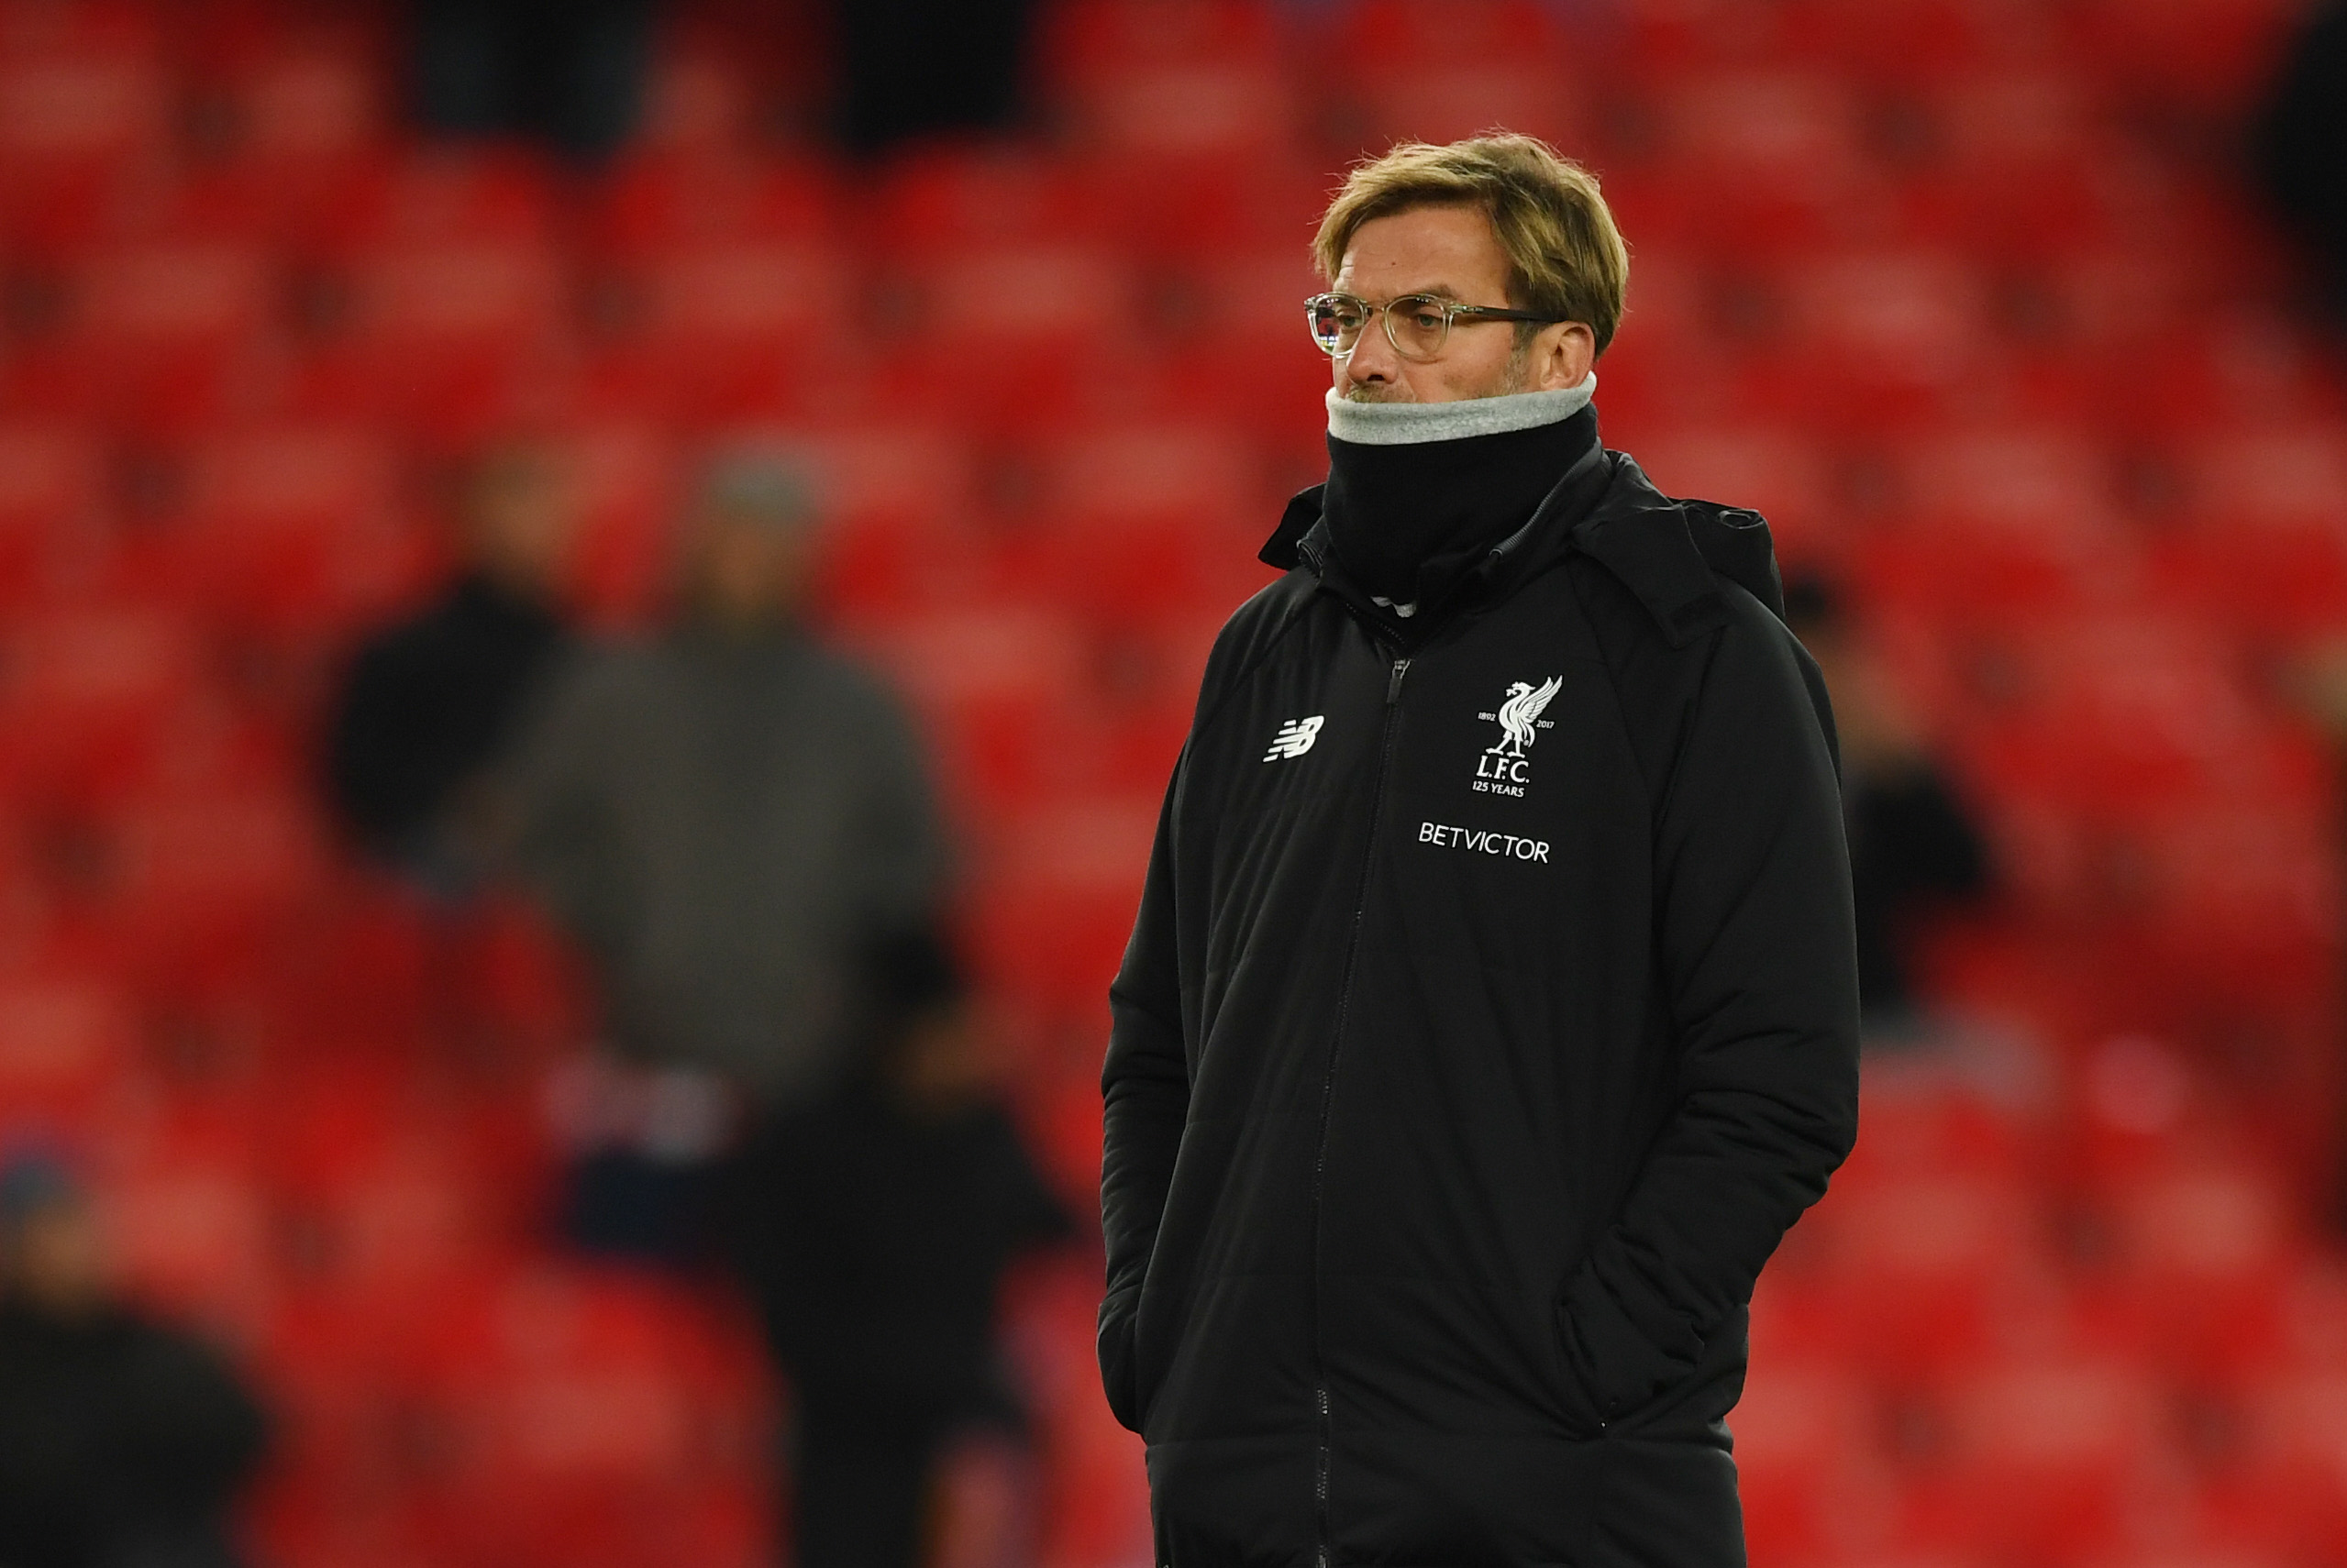 STOKE ON TRENT, ENGLAND - NOVEMBER 29:  Jurgen Klopp, Manager of Liverpool watches his team warm up prior to the Premier League match between Stoke City and Liverpool at Bet365 Stadium on November 29, 2017 in Stoke on Trent, England.  (Photo by Gareth Copley/Getty Images)